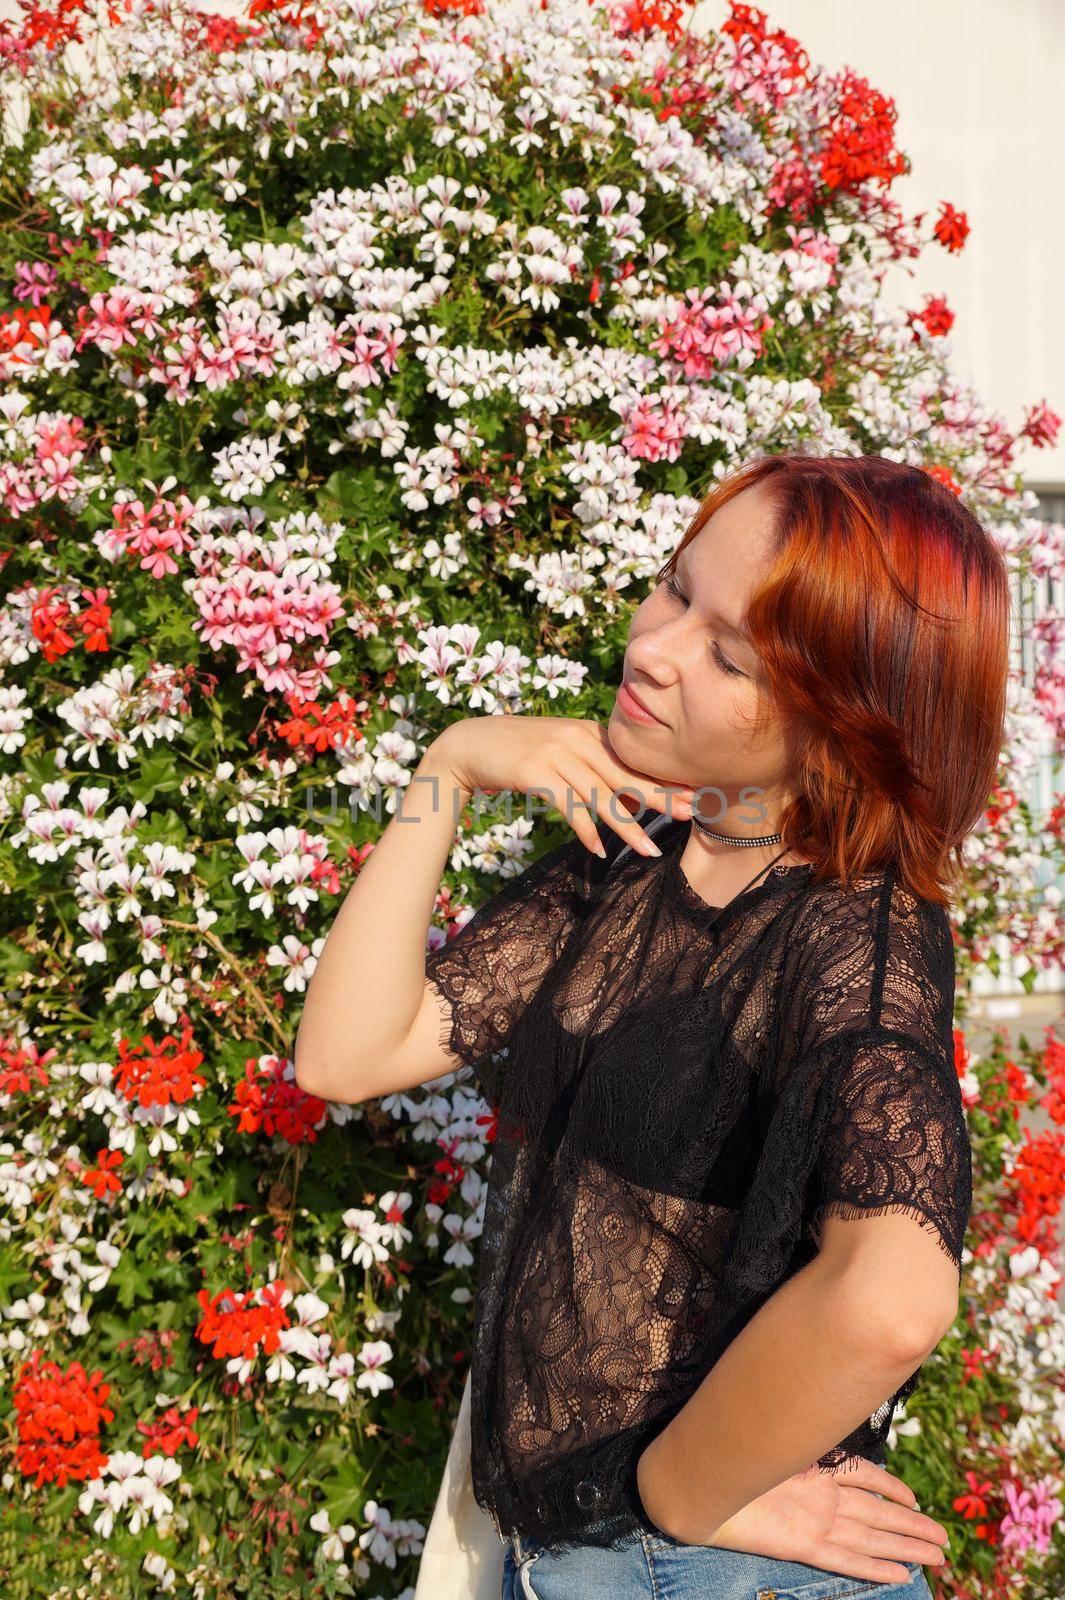 portrait of a smiling red-haired teenage girl with closed eyes on a floral background in the sunlight.